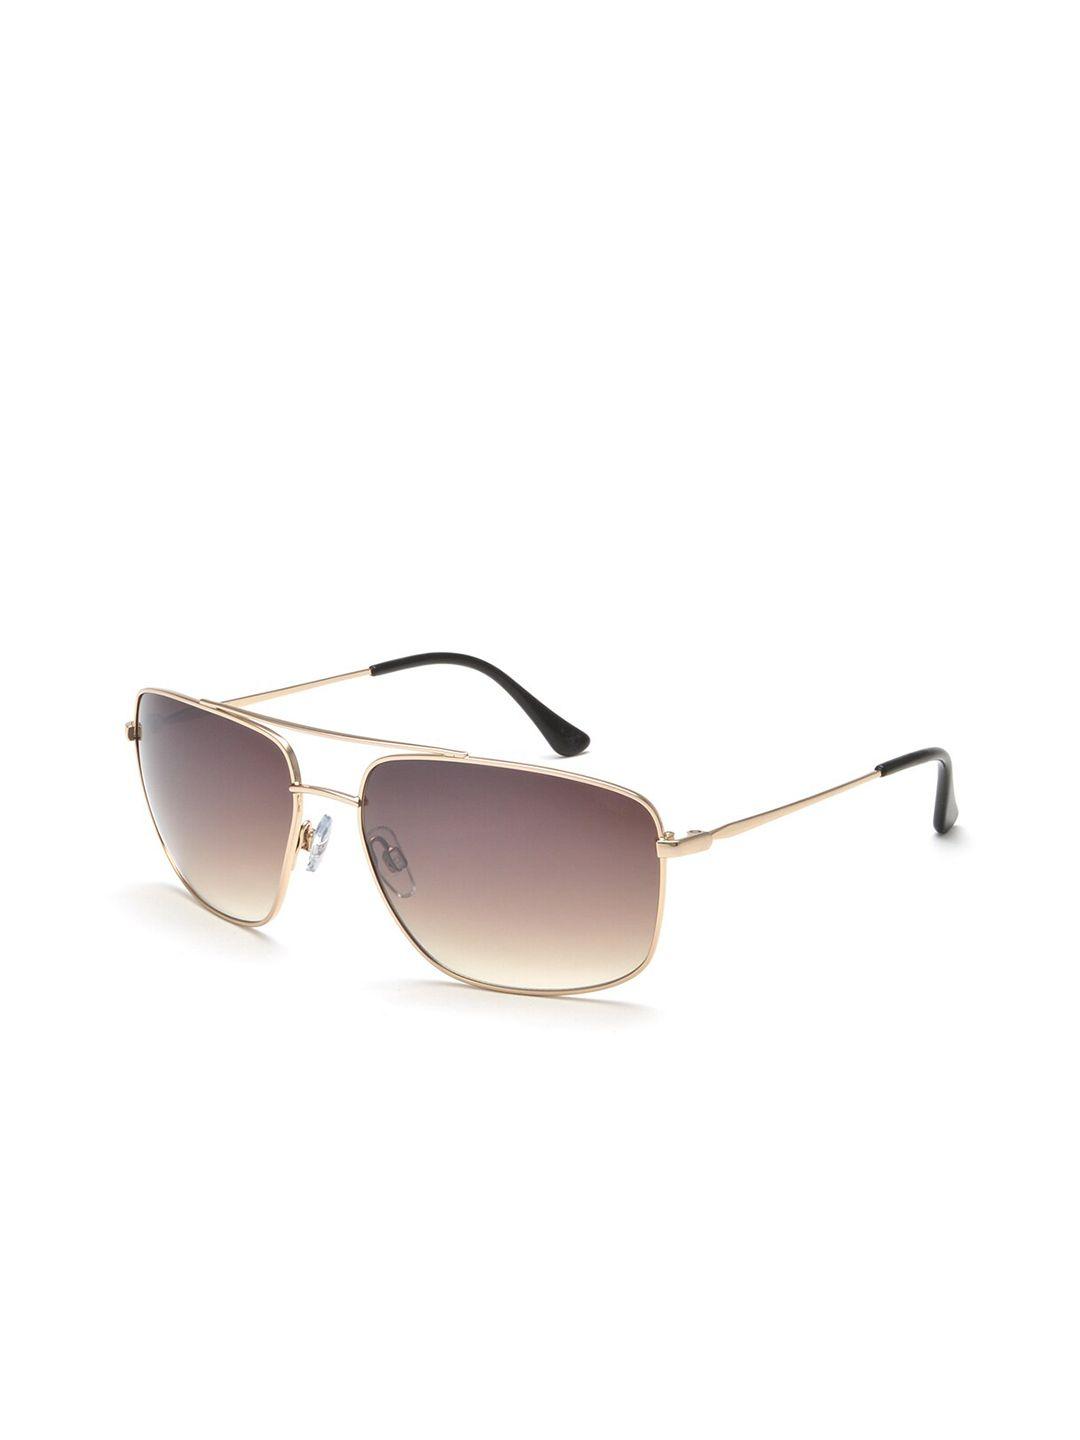 idee men square sunglasses with uv protected lens